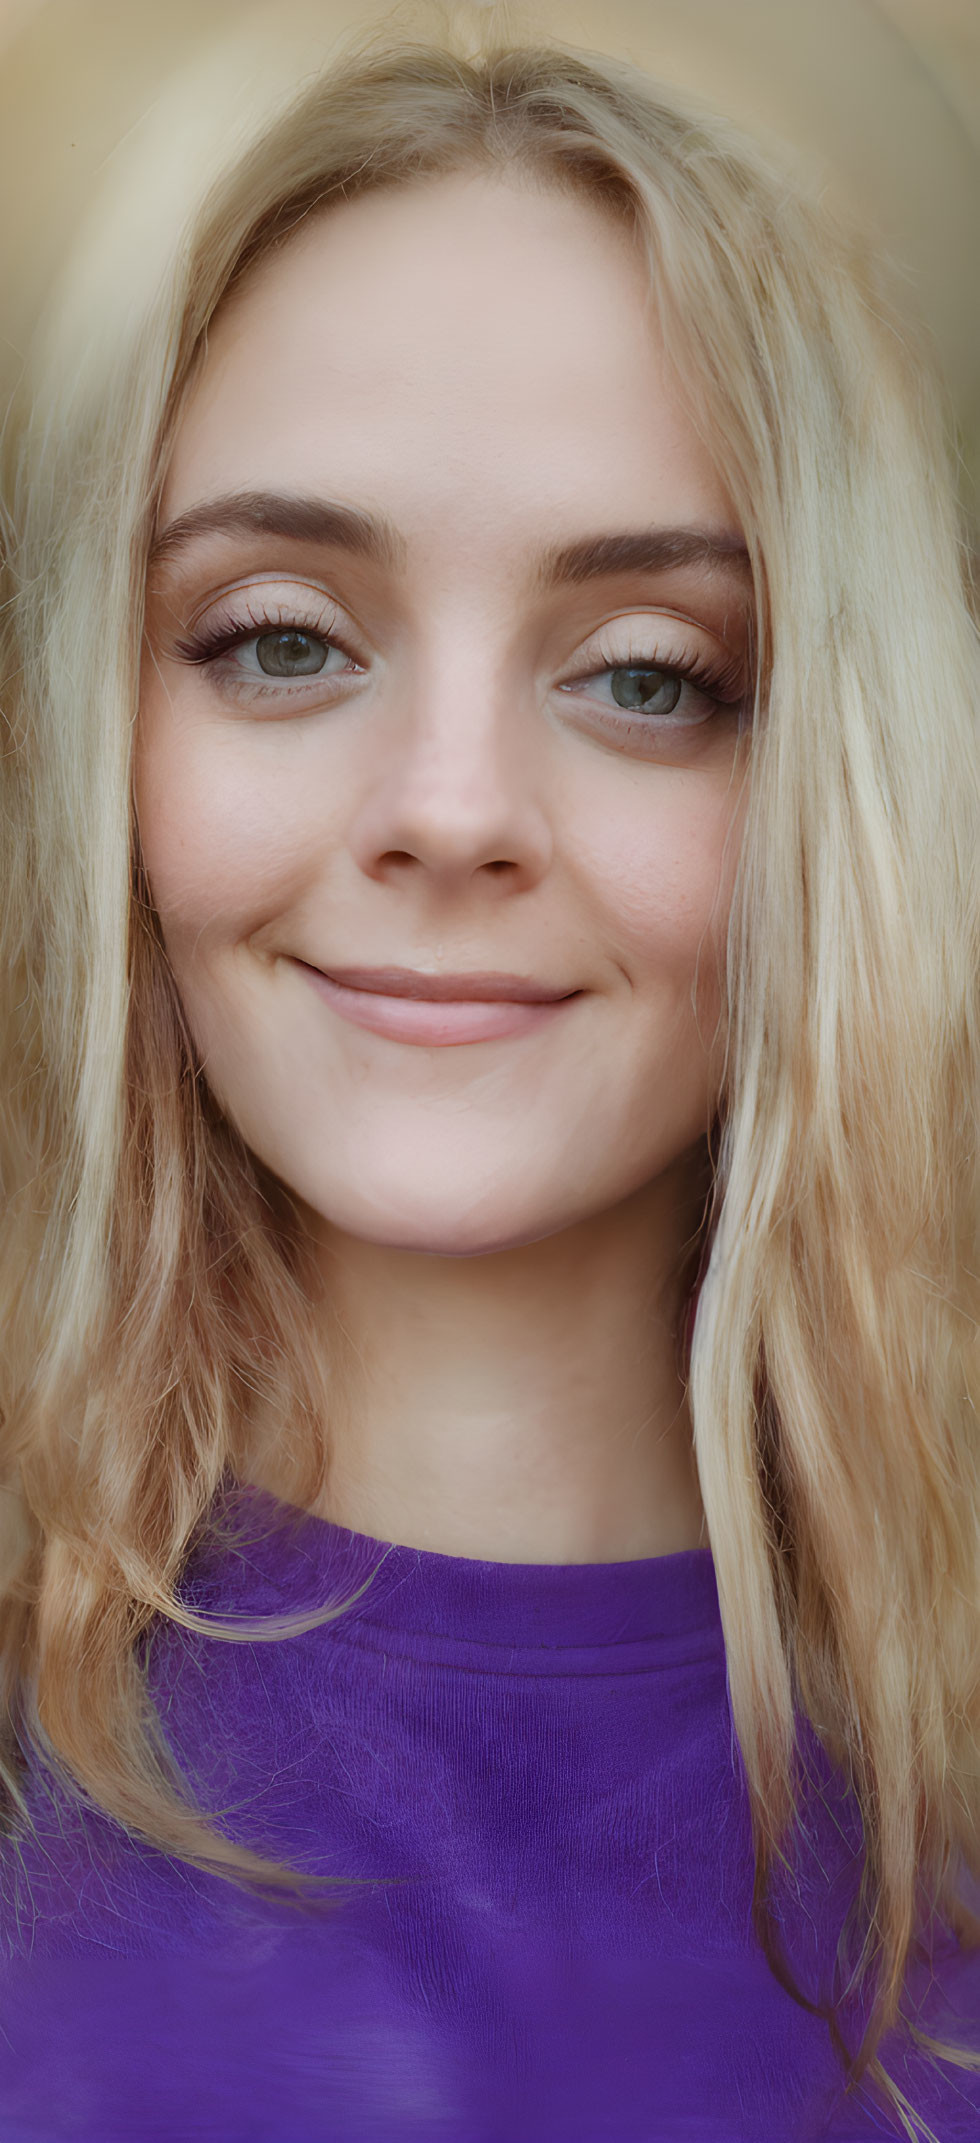 Blonde Woman in Purple Top Smiling with Blue Eyes